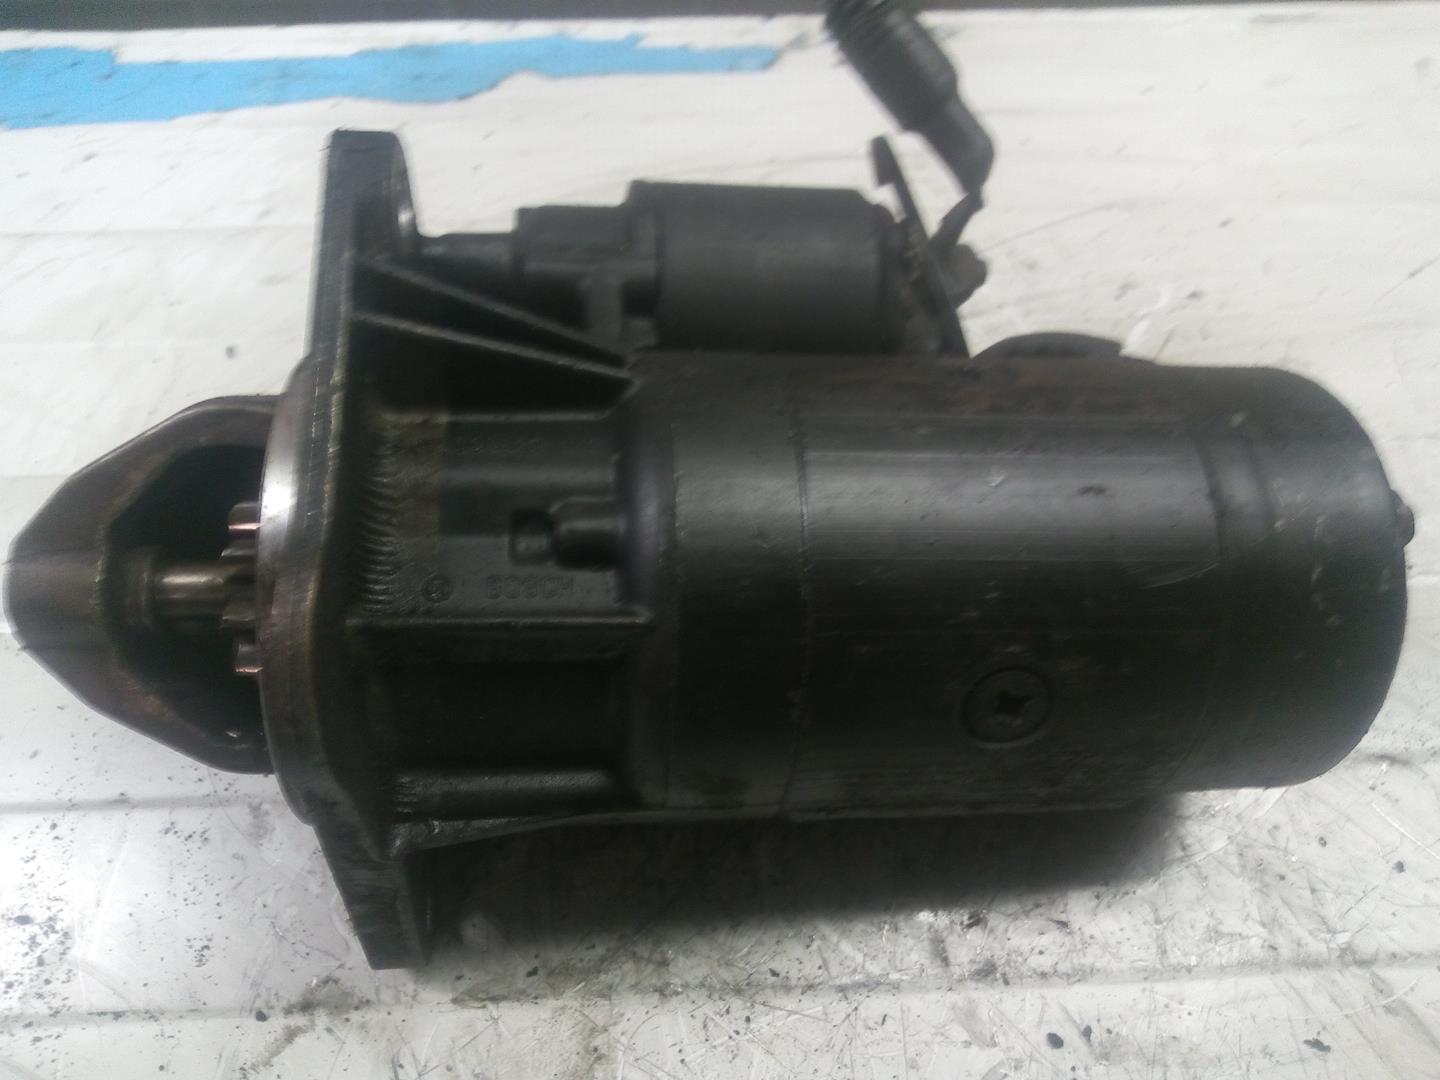 LAND ROVER Discovery 1 generation (1989-1997) Starter Motor 9001338027 18550205